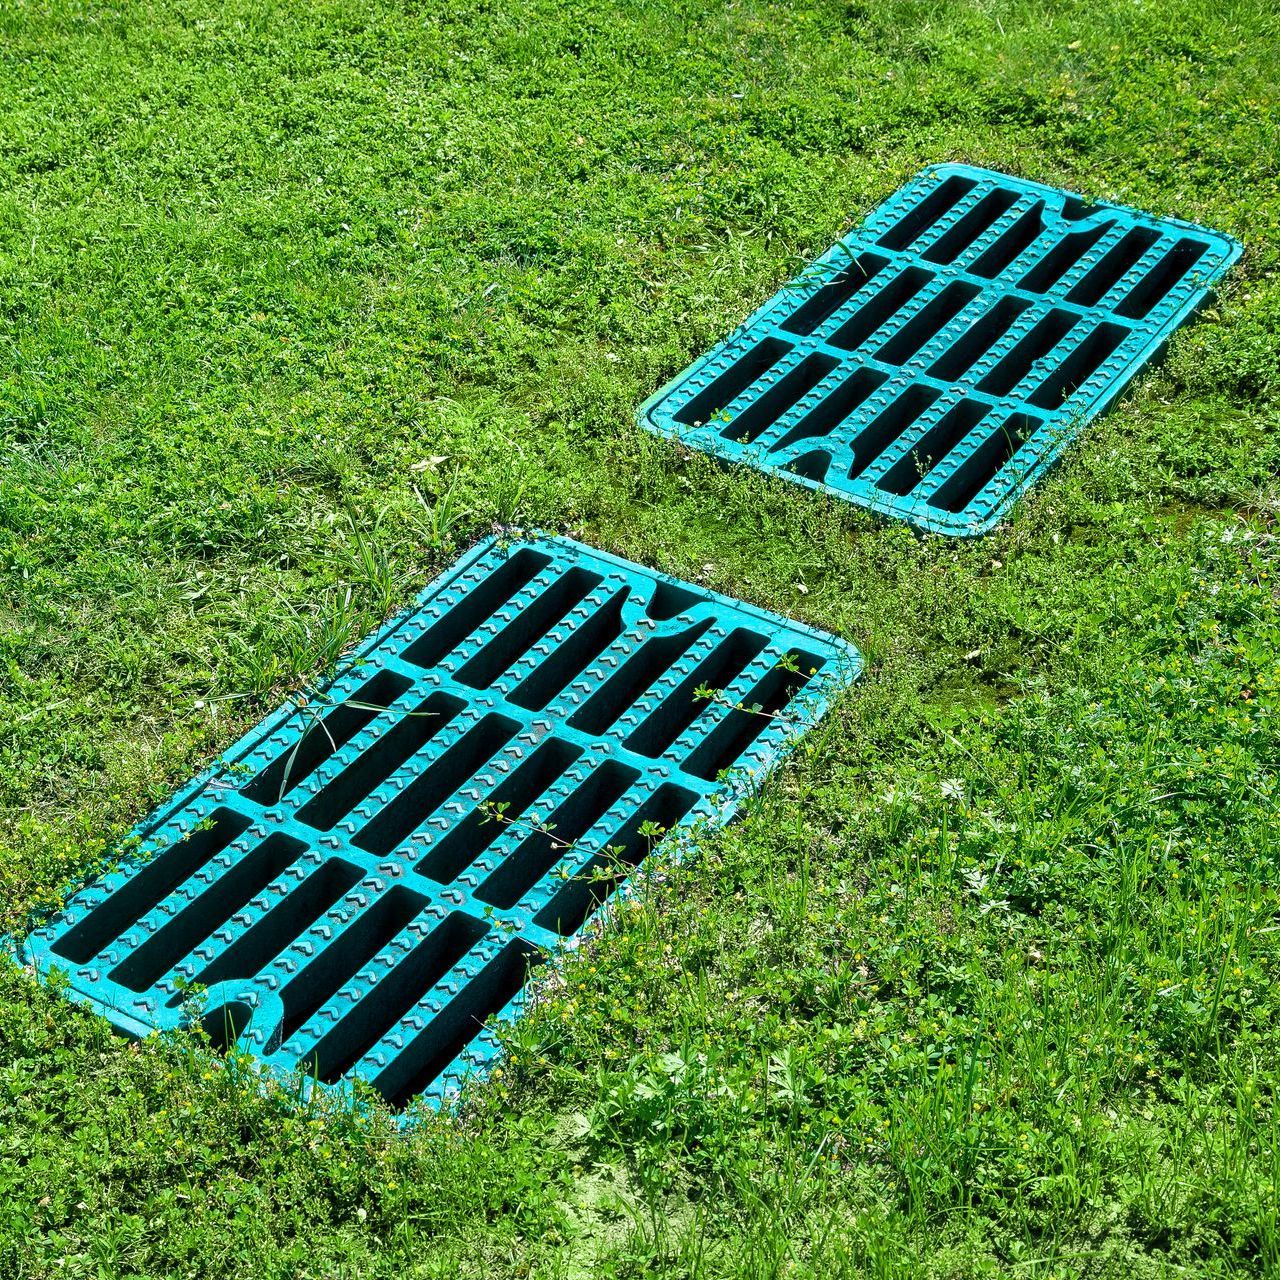 two blue manhole covers are sitting in the grass .